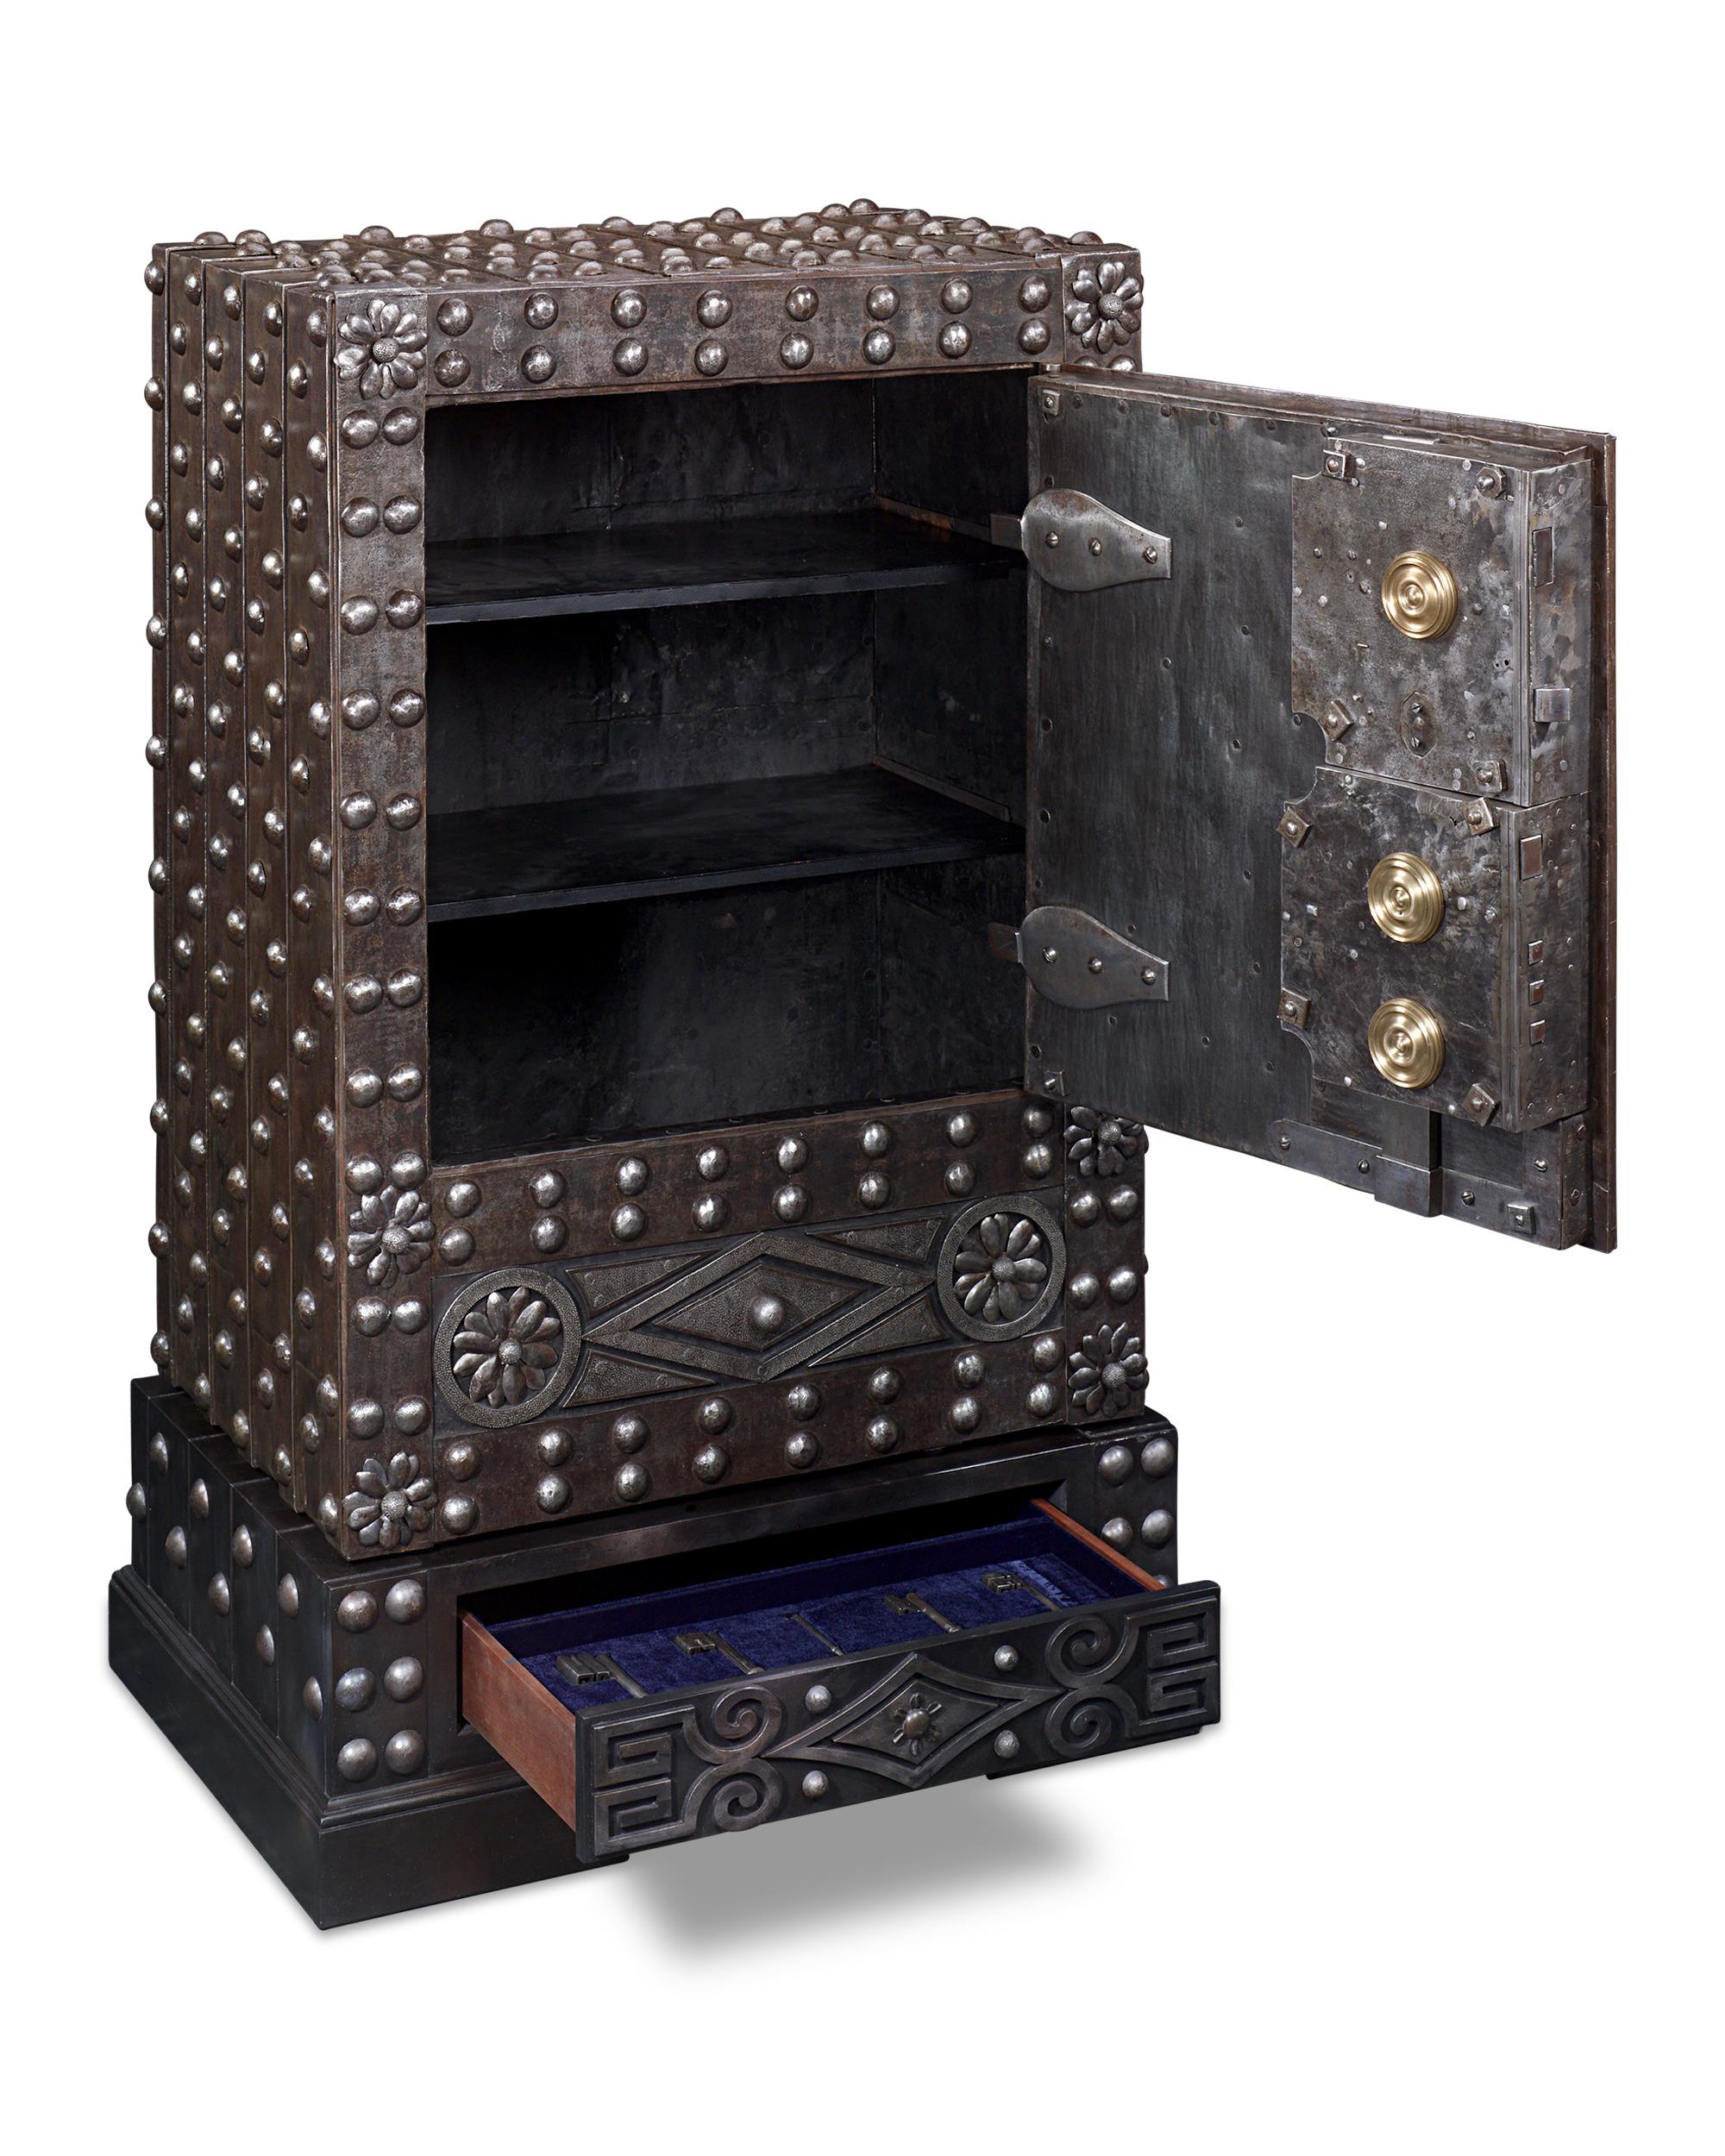 This rare and imposing 18th-century safe hails from the Turin region of northwestern Italy, and is crafted of reinforced wrought iron designed to be virtually indestructible. Impenetrable without the complex system of keys and know-how, this safe